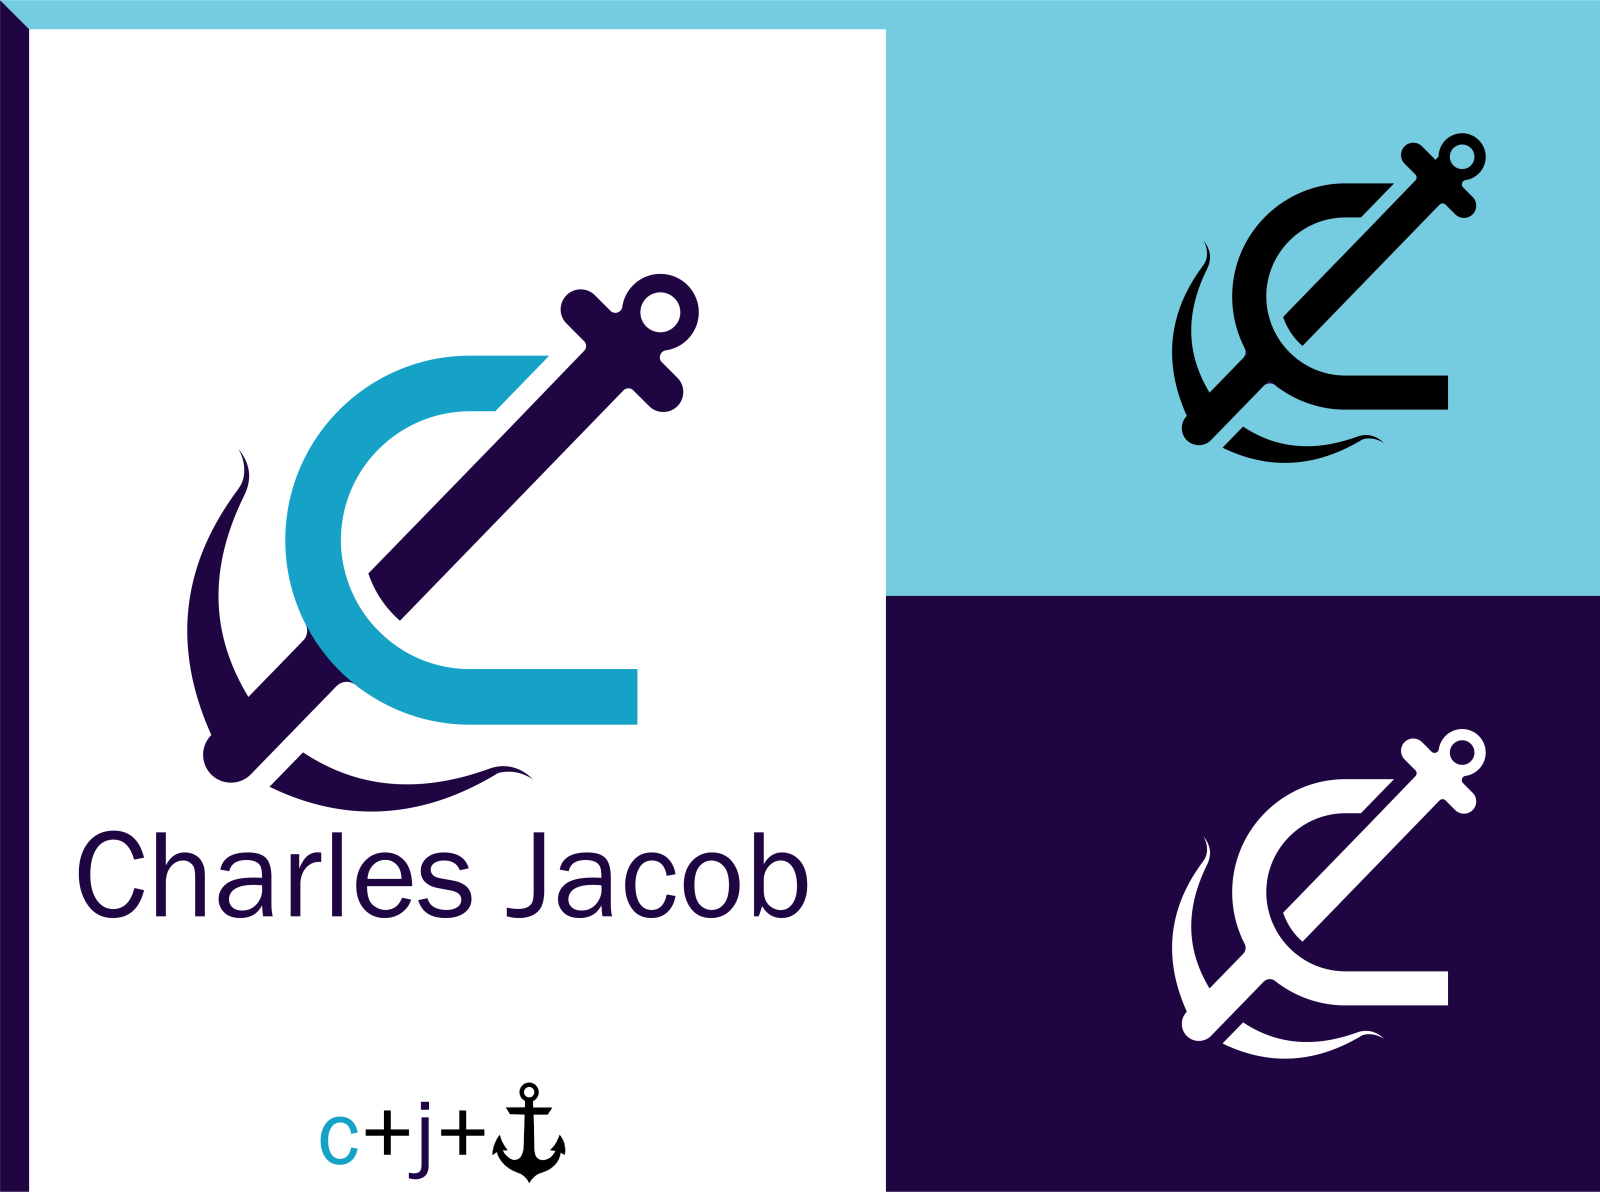 CJ with anchor logo by nahl9633 on Dribbble